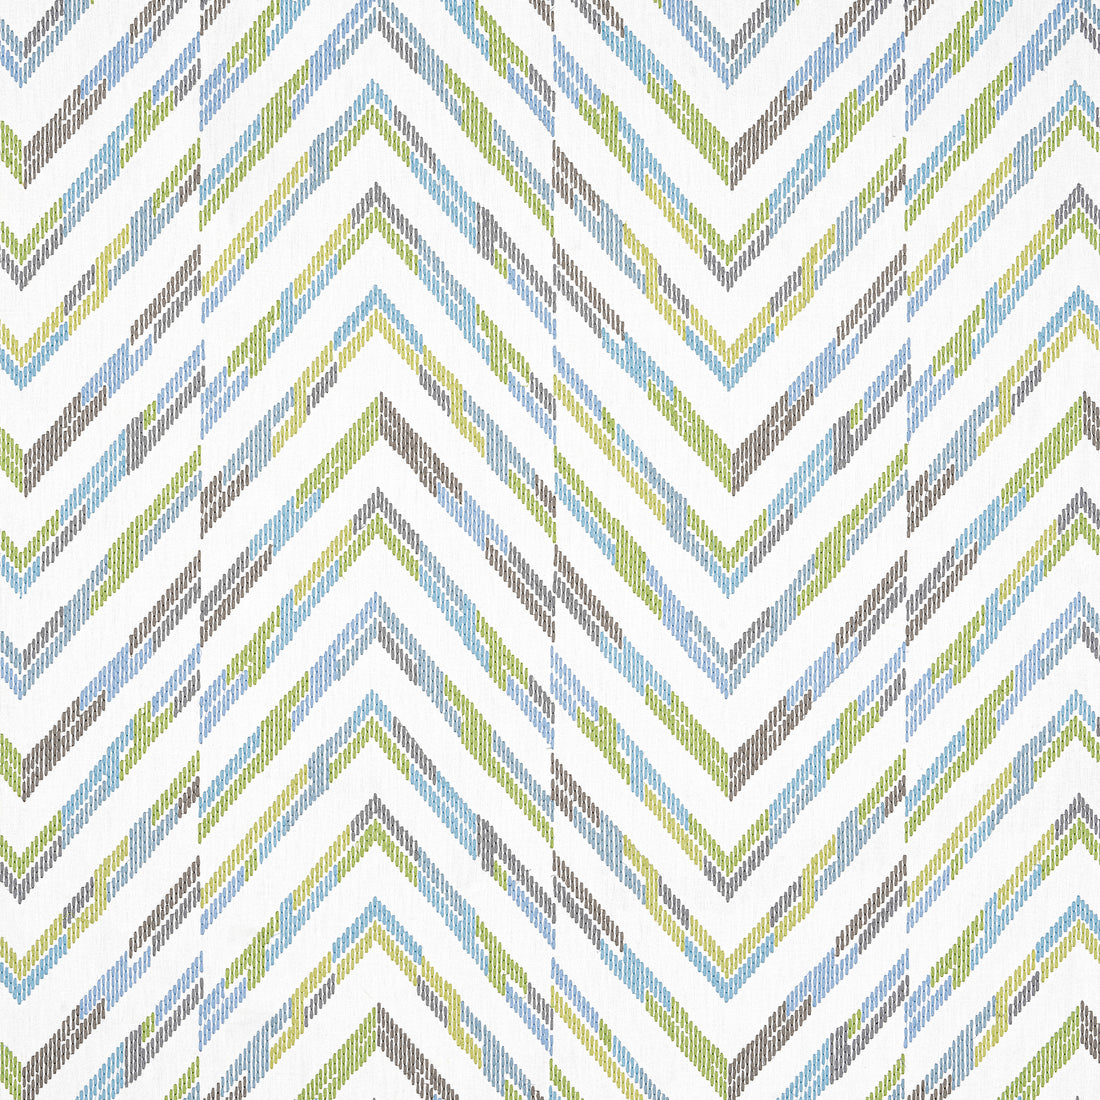 Hamilton Embroidery fabric in spa blue color - pattern number W714342 - by Thibaut in the Canopy collection